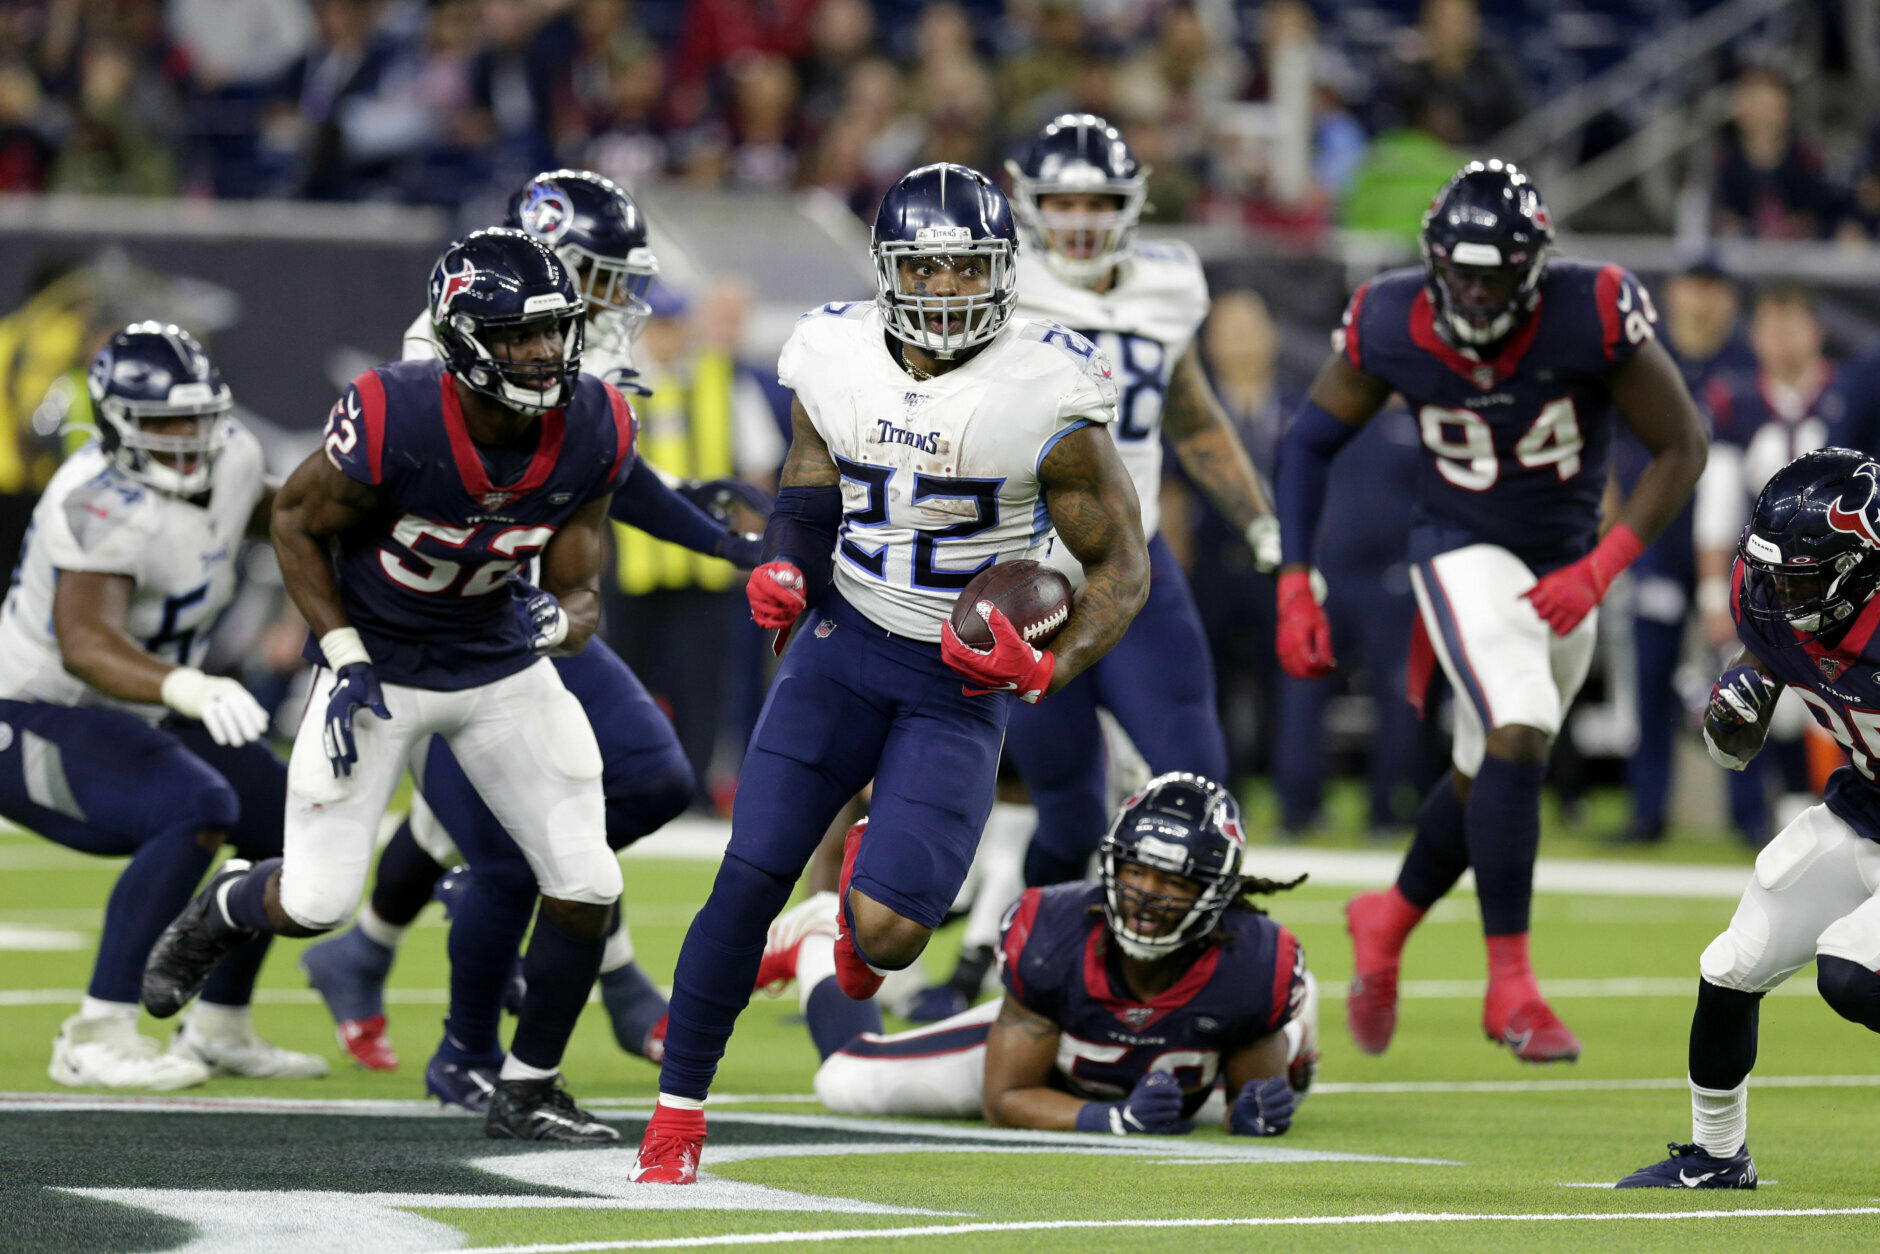 <p><b><i>Titans 35</i></b><br />
<b><i>Texans 14</i></b></p>
<p>Tennessee got its first win in Houston in nearly eight years, bringing one of the hottest QBs (Ryan Tannehill) and the league&#8217;s regular season rushing leader (Derrick Henry) into New England with an opportunity to upset the team head coach Mike Vrabel help to make a dynasty. This is matchup worthy of its primetime Saturday slot.</p>
<p>Meanwhile, Houston rested their key starters and host Buffalo in a true toss up game. Bill O&#8217;Brien should coach it like his job depends on it — because it just might.</p>
